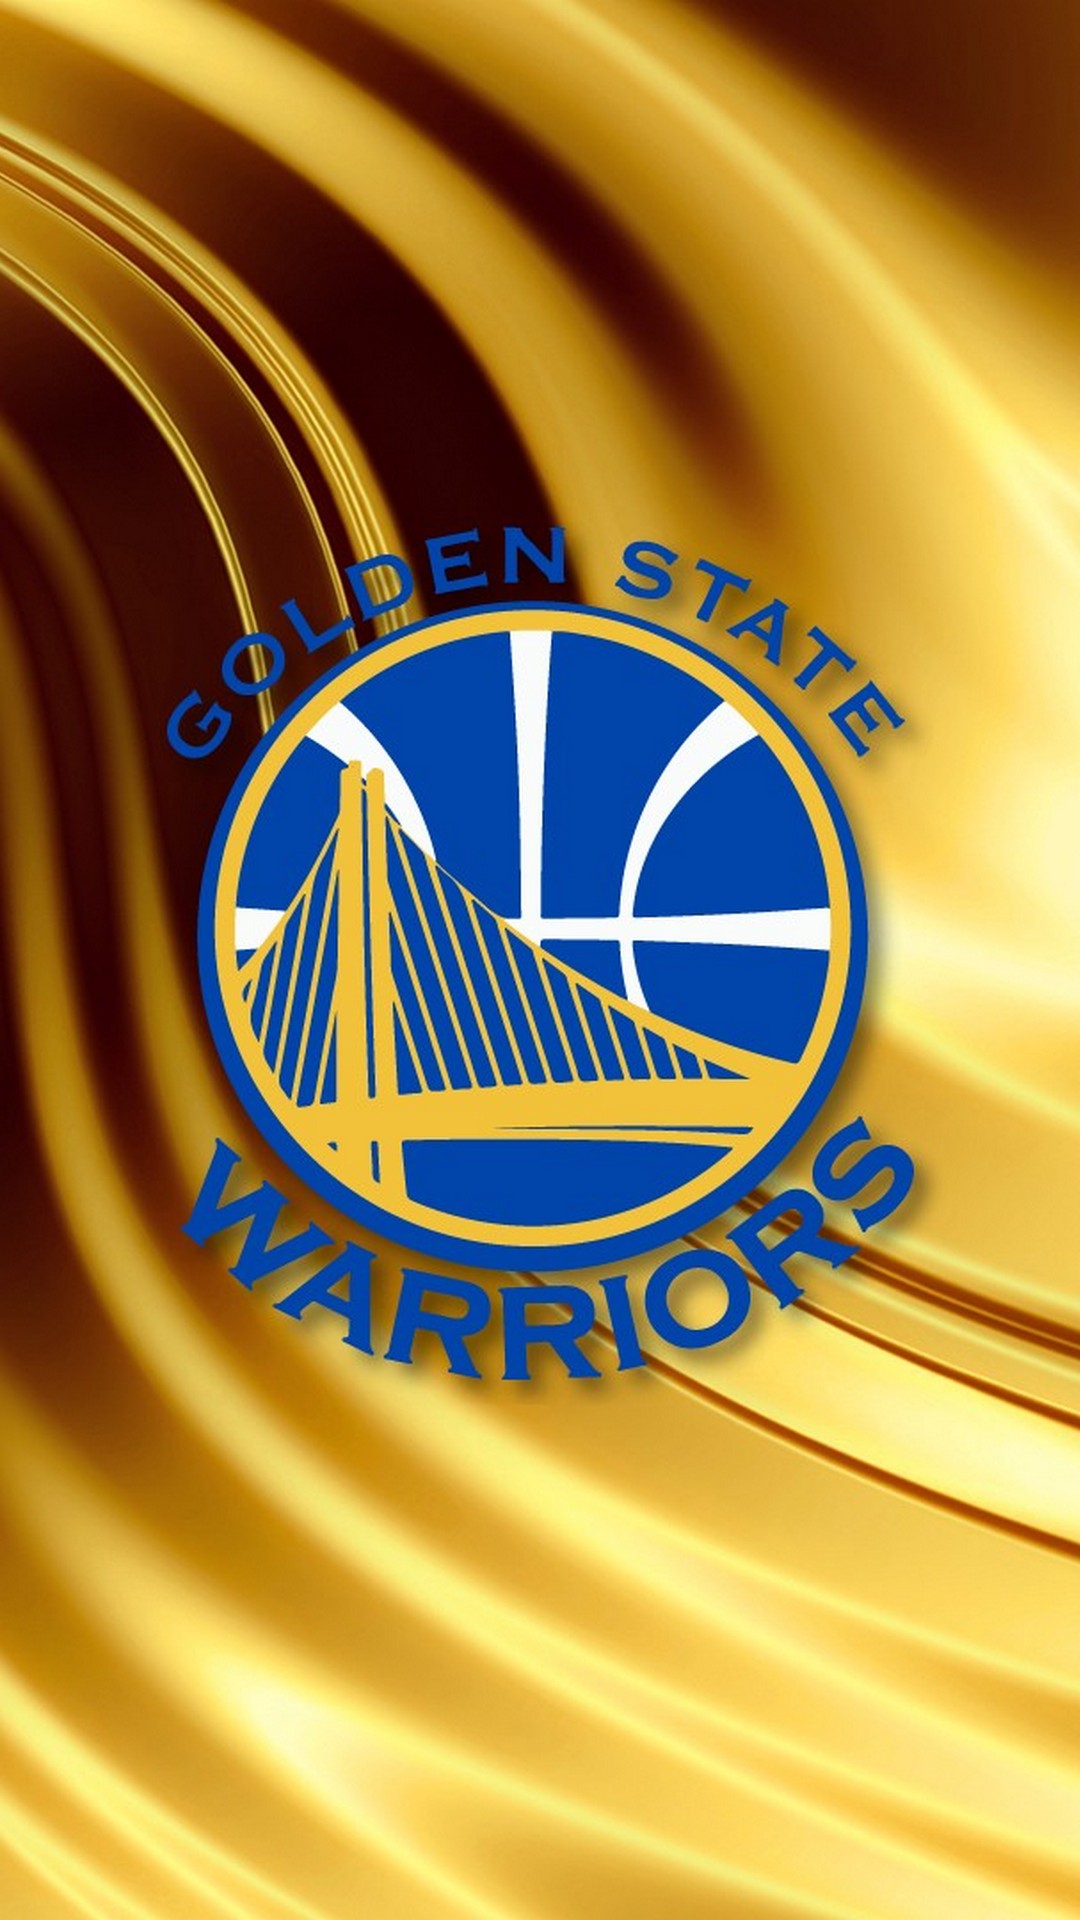 Wallpaper Golden State Warriors Mobile With Resolution 1080X1920 pixel. You can make this wallpaper for your Desktop Computer Backgrounds, Mac Wallpapers, Android Lock screen or iPhone Screensavers